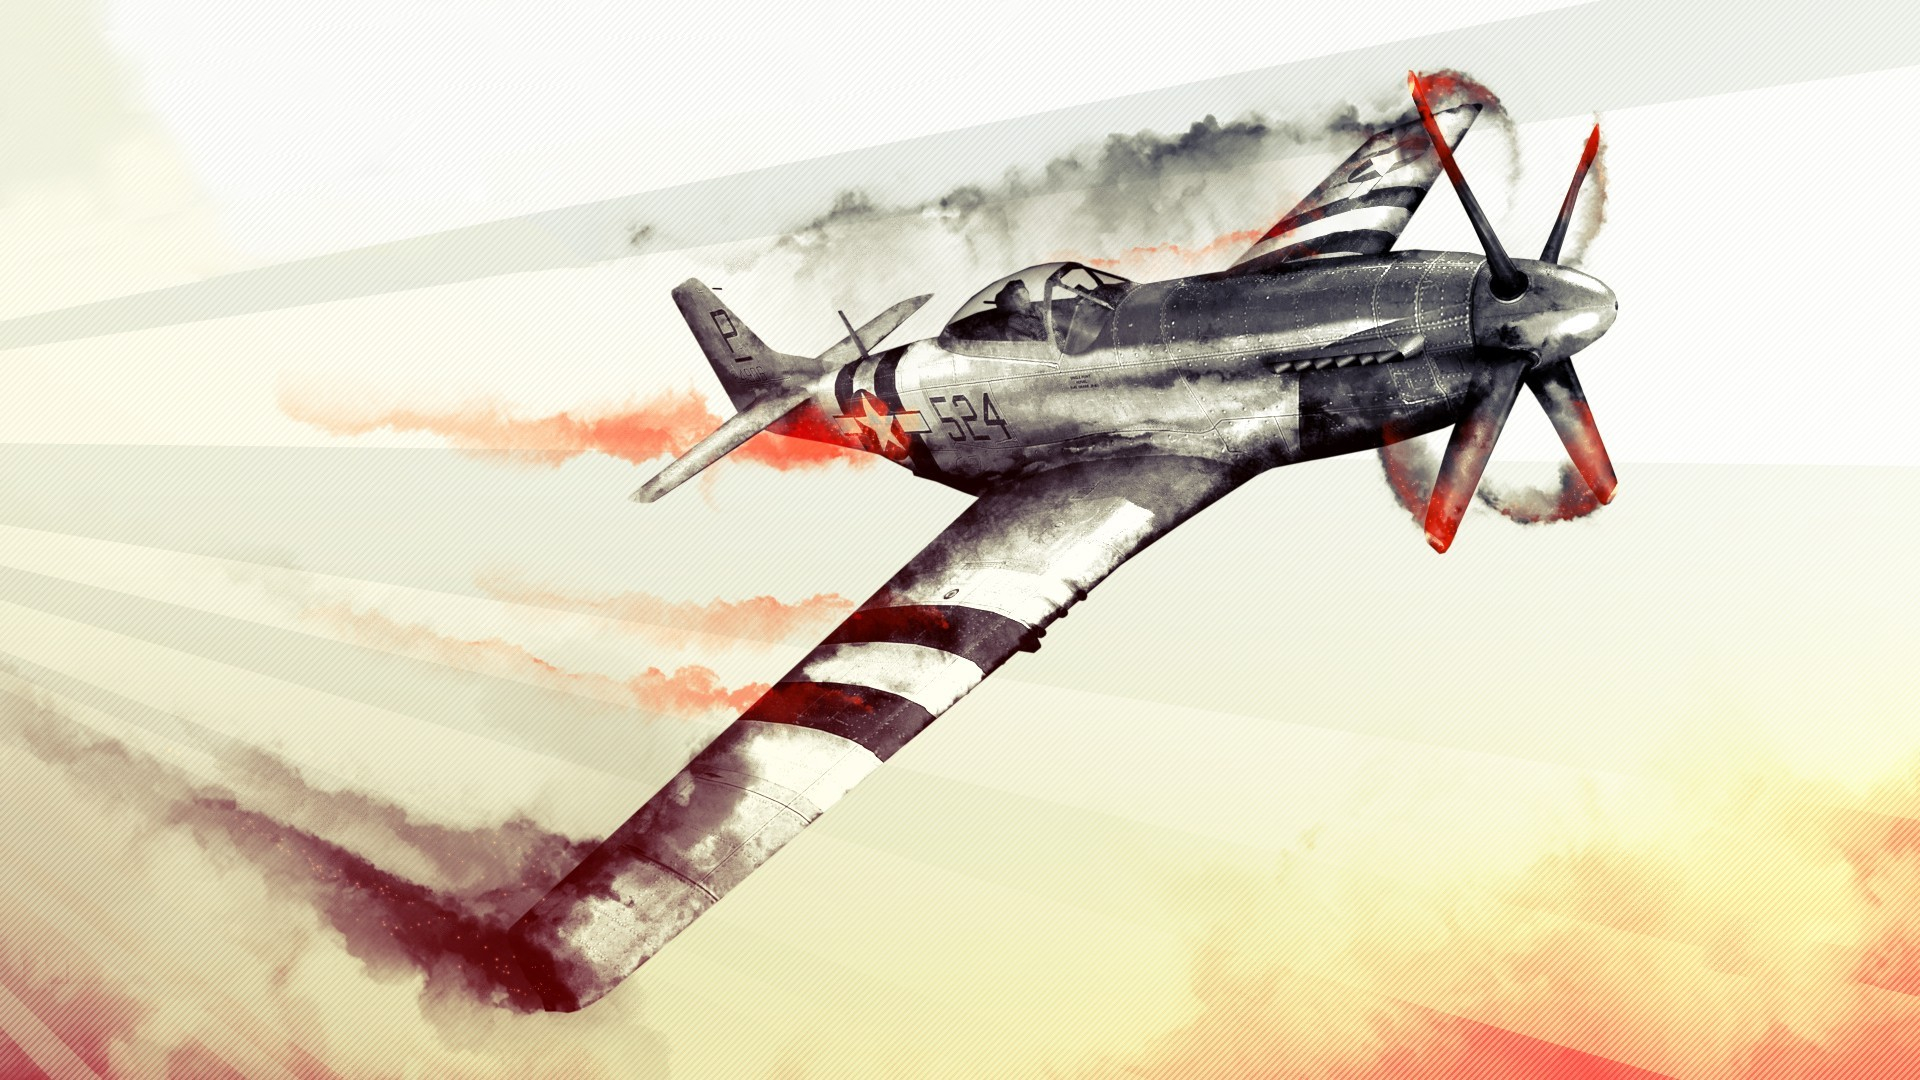 1920x1080 Wallpaper : illustration, red, vehicle, airplane, Ford Mustang, military aircraft, watercolor, North American P 51 Mustang, jet fighter, World War II, War Thunder, aviation, wing, atmosphere of earth, fighter aircraft, aircraft engine